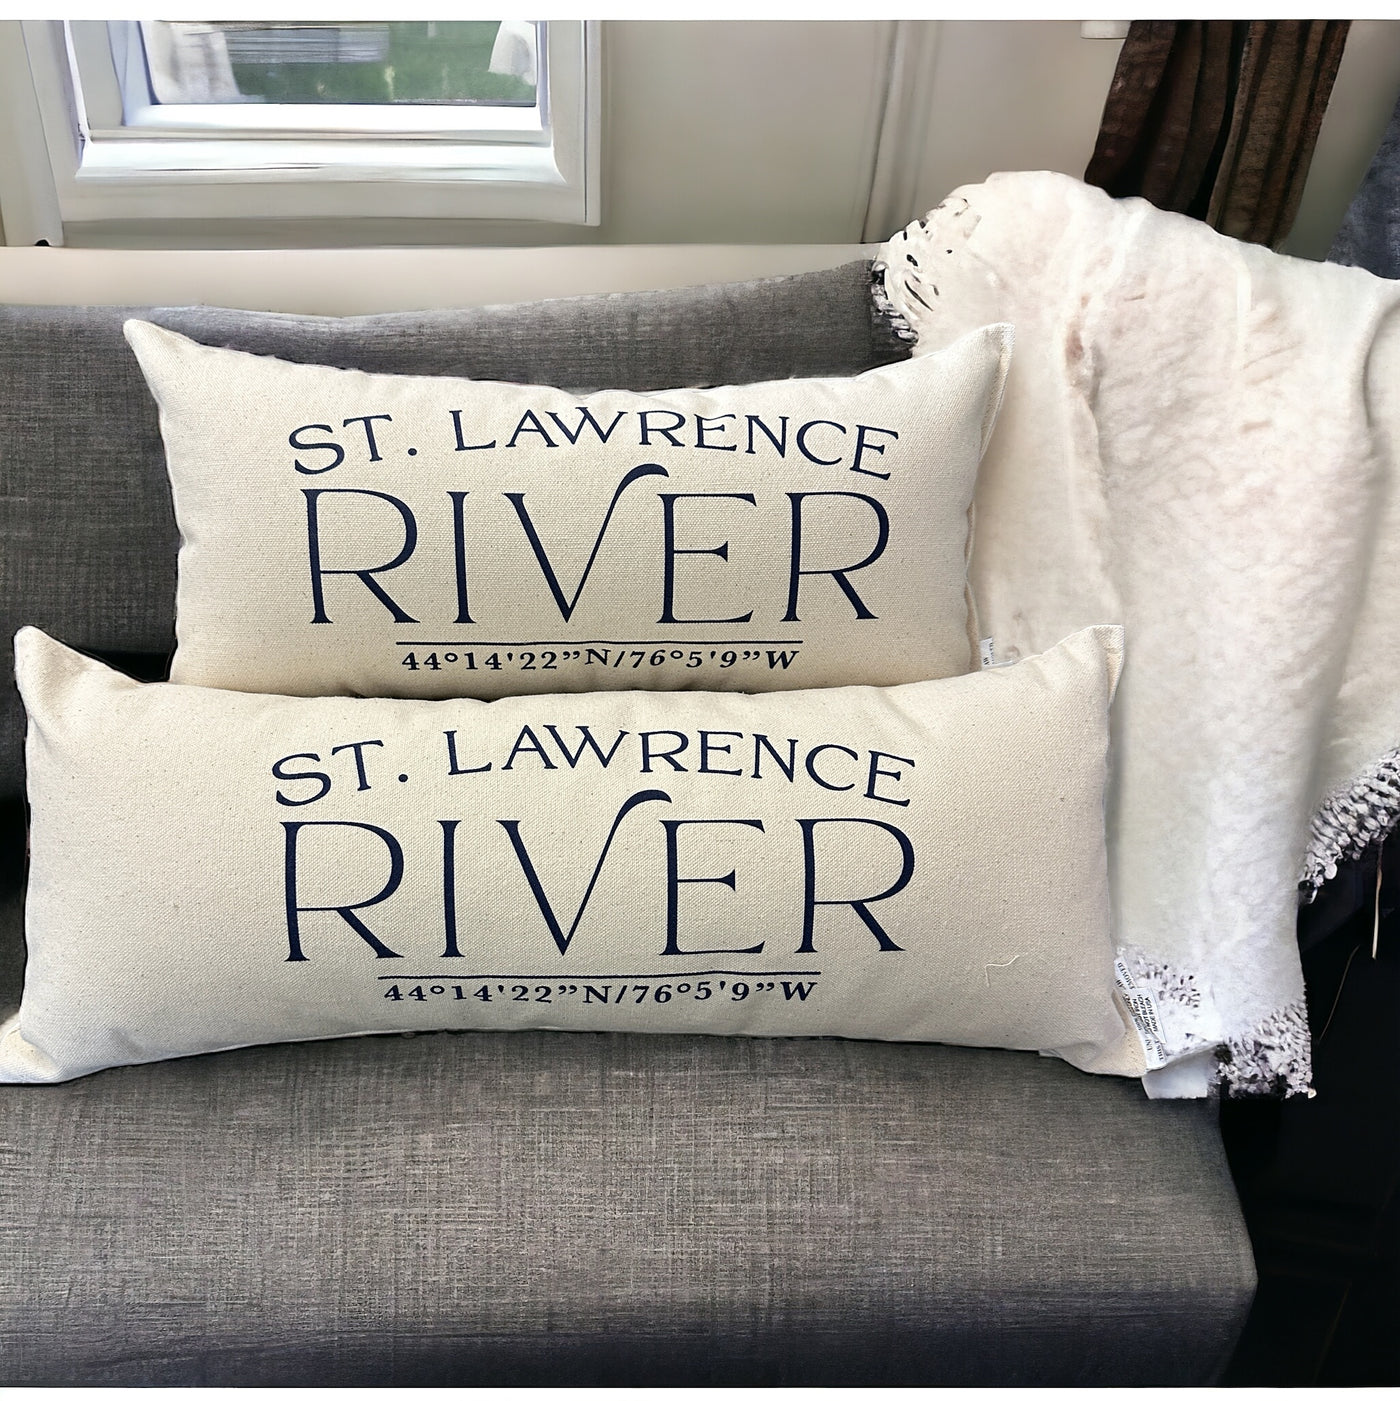 St. Lawrence River Pillows